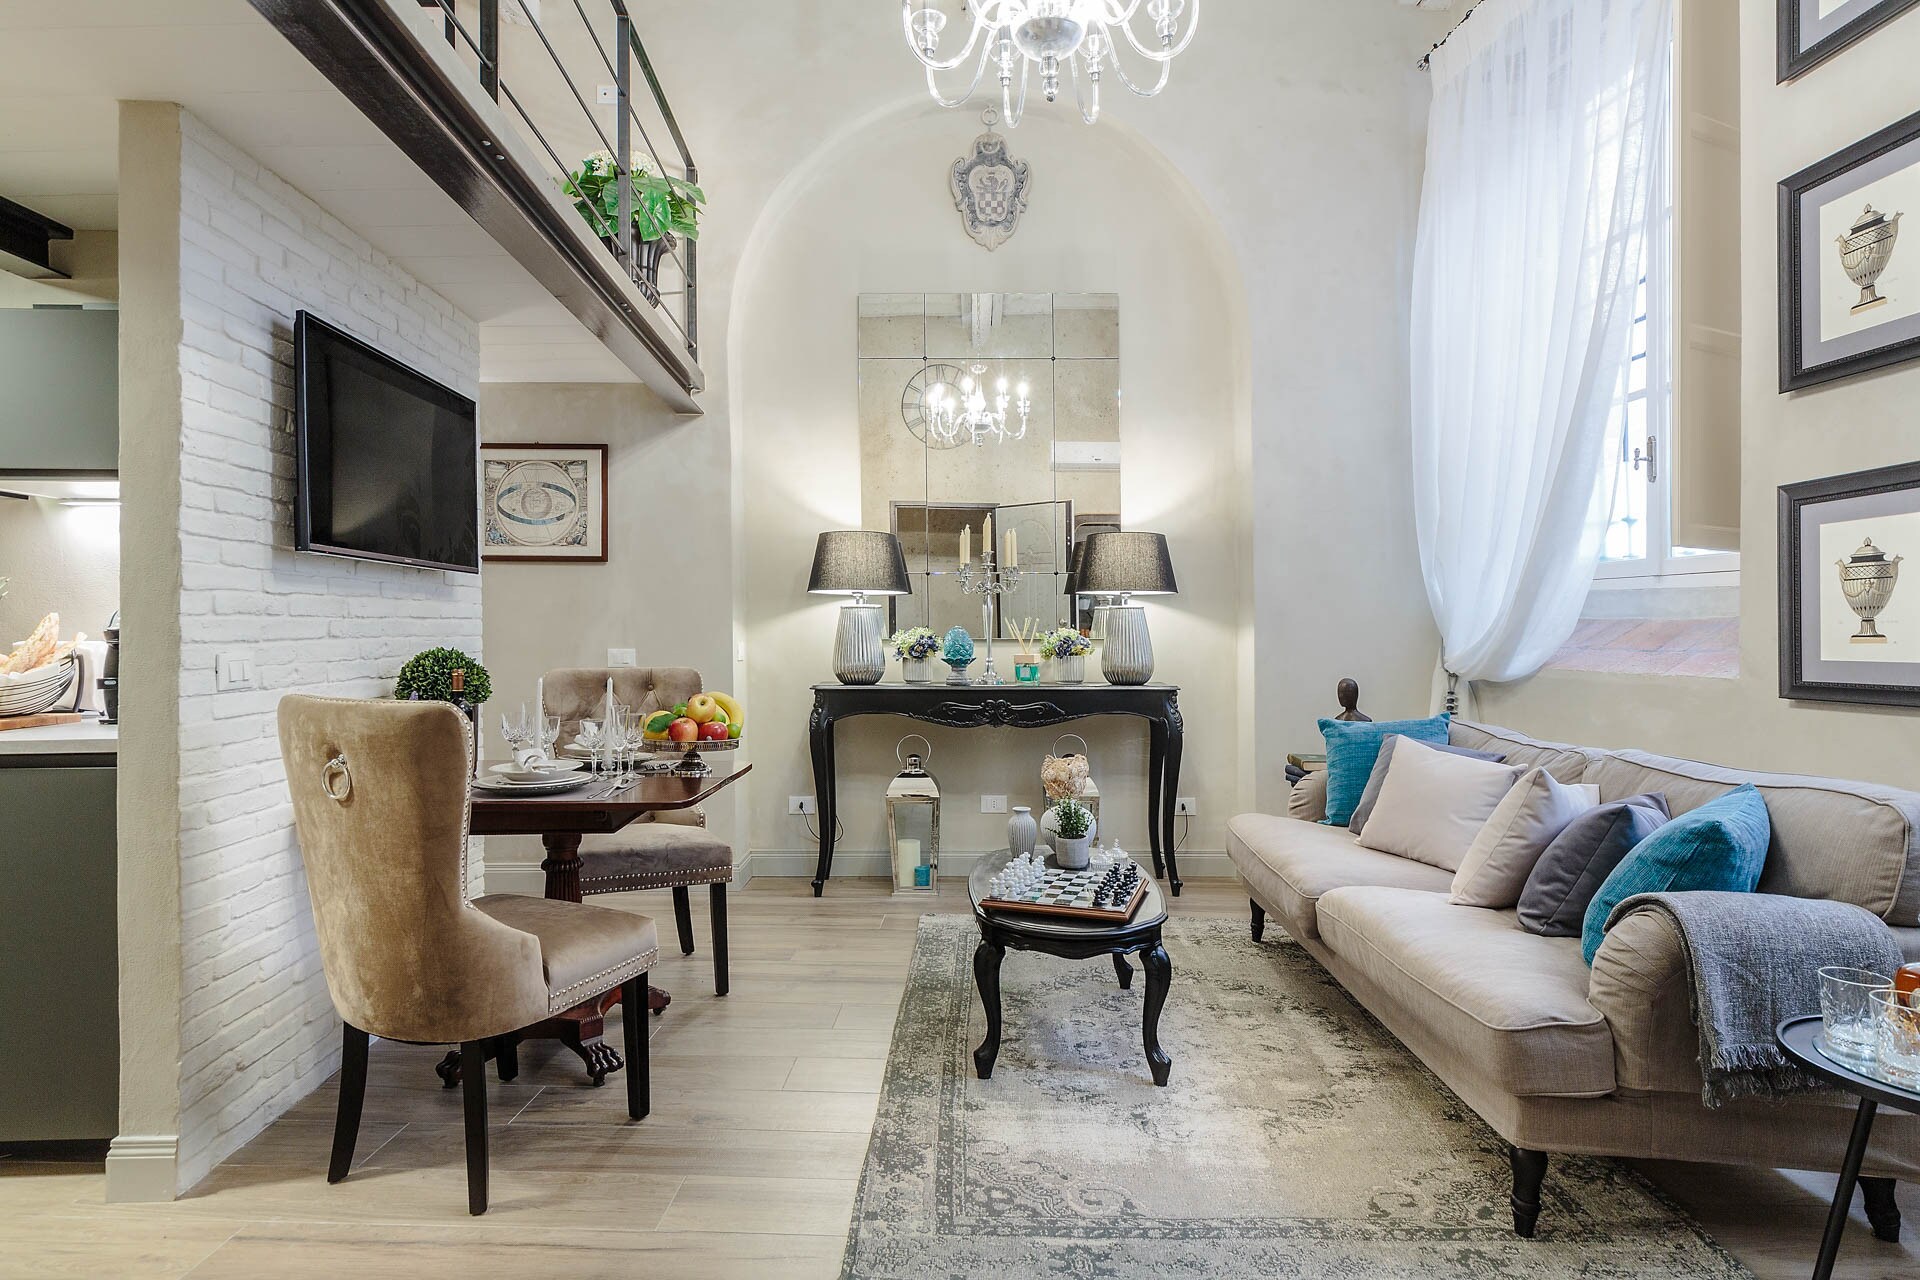 Property Image 1 - Elegant Apartment Suite, Masterful Interior inside the Walls of Lucca